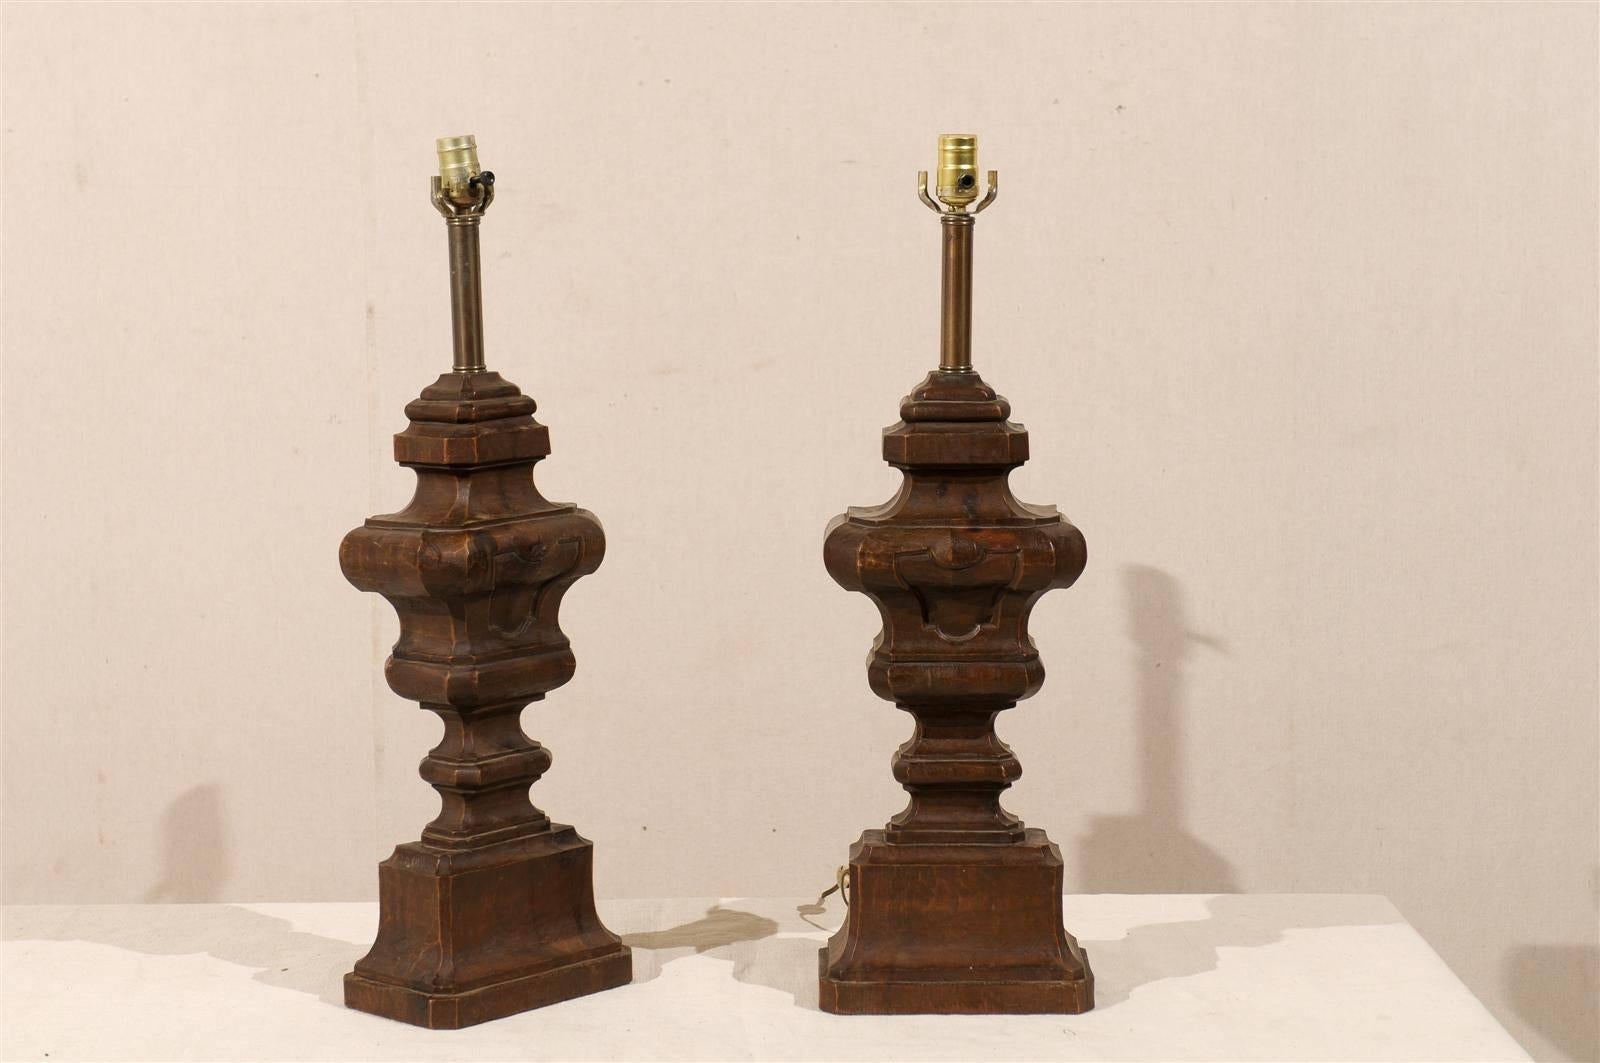 A pair of Italian carved wood table lamps. This pair of Italian wooden table lamps from the 20th century feature a brown color with more of a walnut color. This pair of Italian lamps has been rewired for the US. The wire comes out through the back.